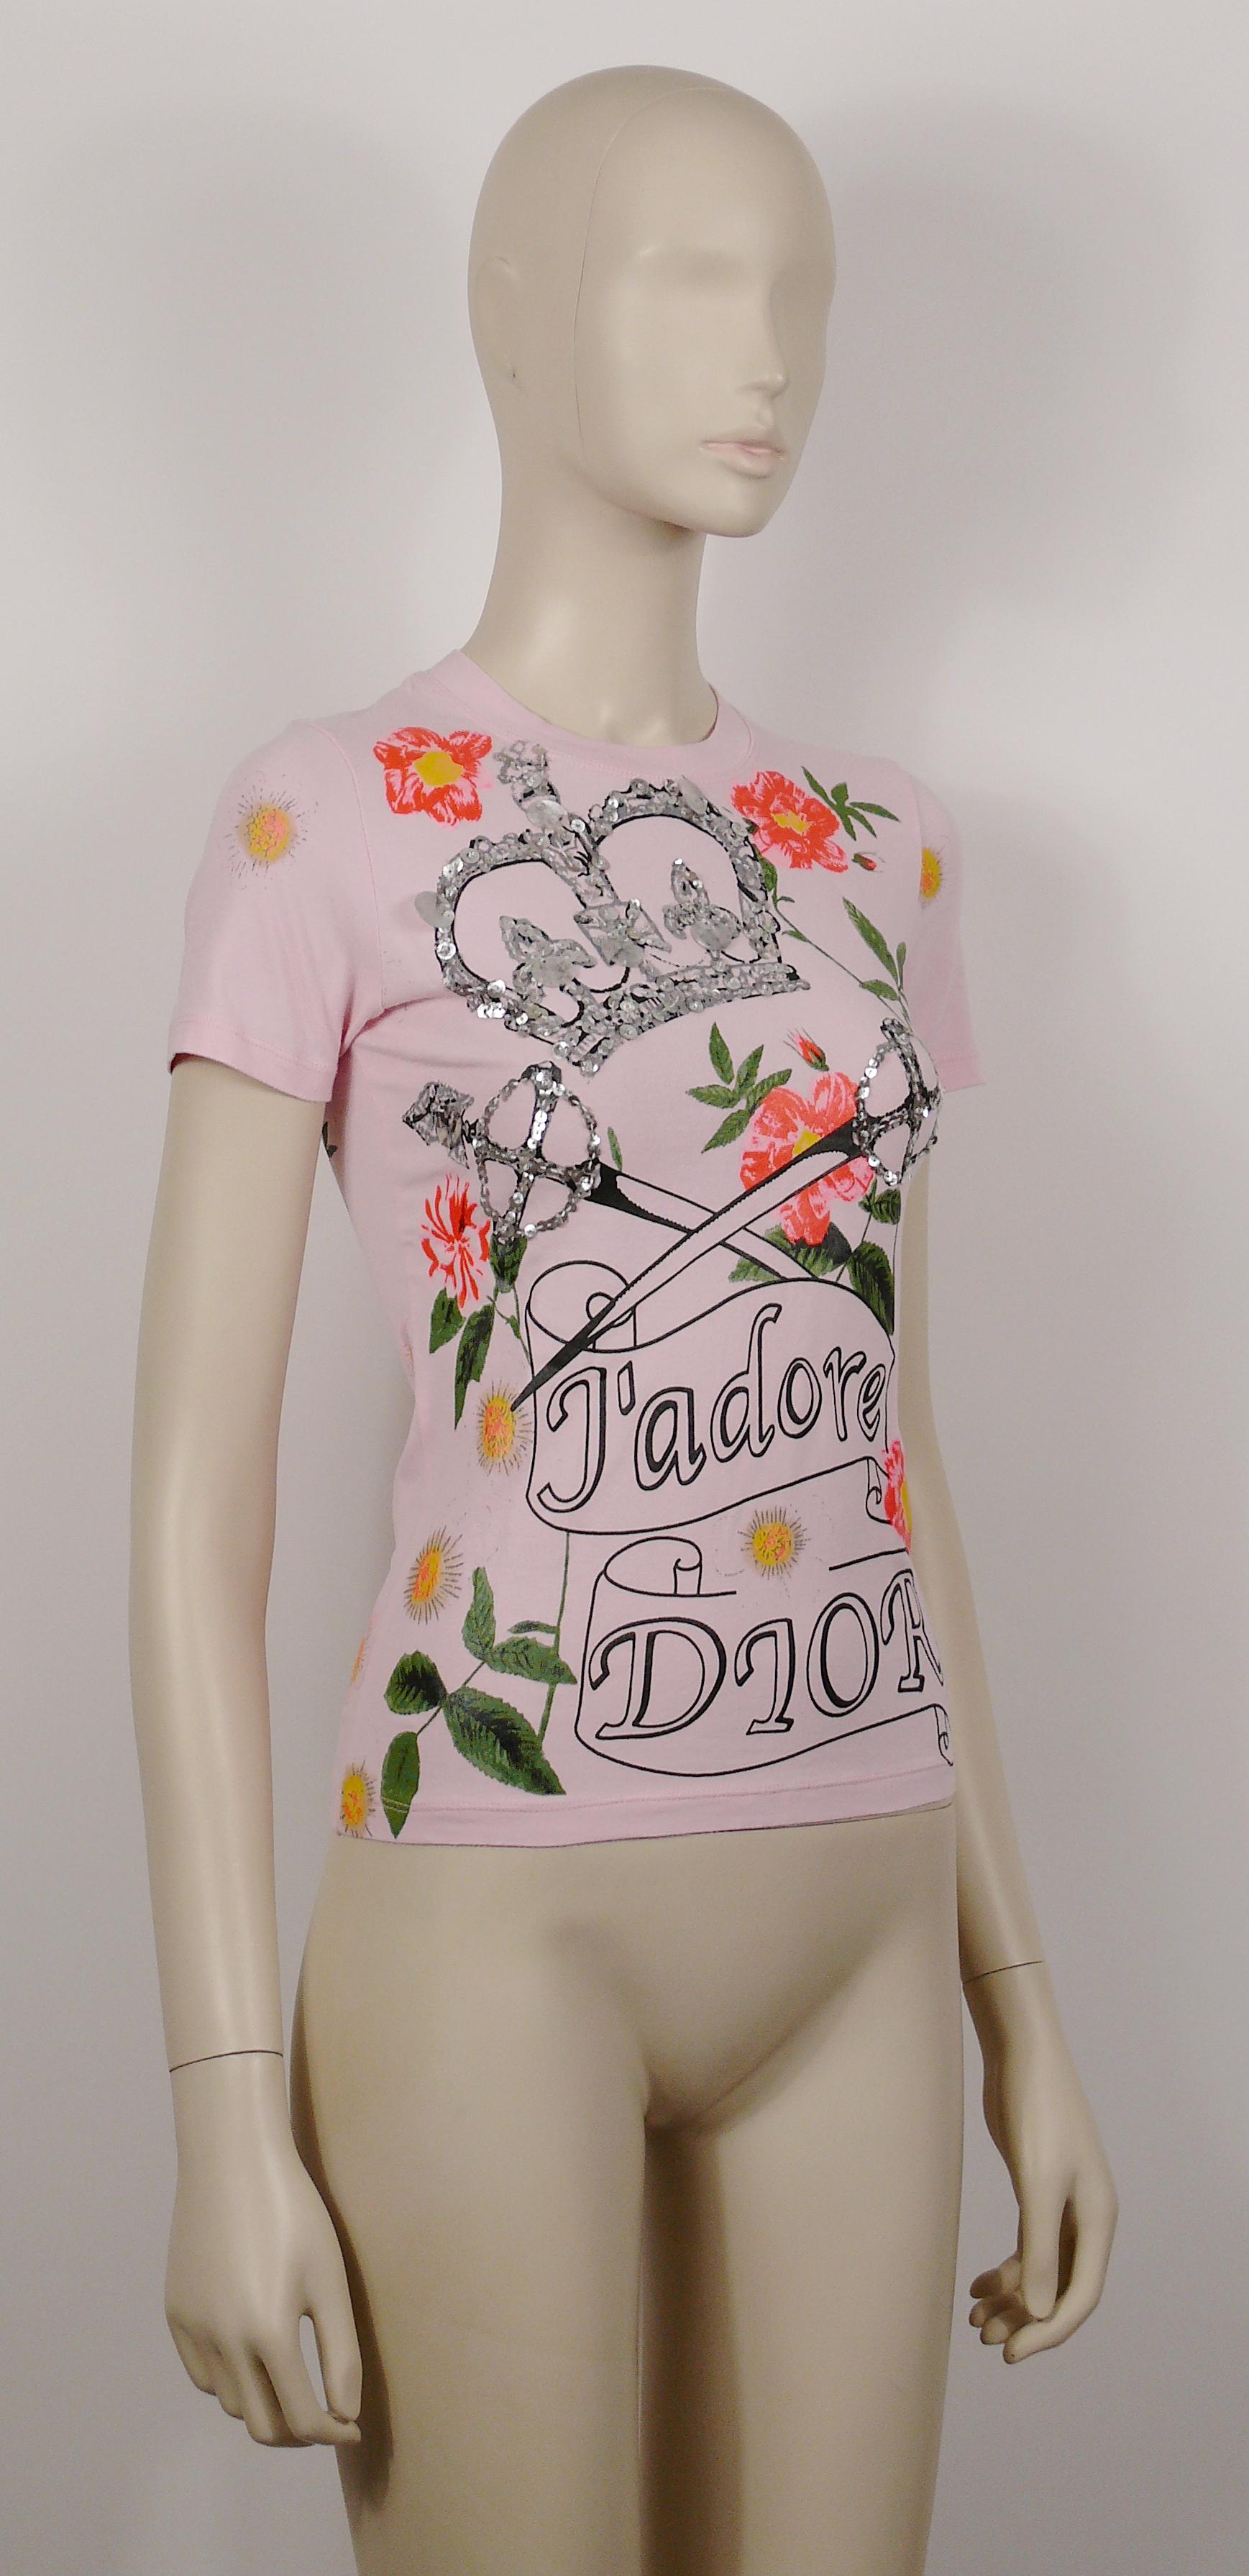 CHRISTIAN DIOR by JOHN GALLIANO J'ADORE DIOR short-sleeve pink top featuring a crown and crossed swords embellished with silver toned sequins, multicolored floral print.

Label reads CHRISTIAN DIOR BOUTIQUE Paris.
Made in France.

Size tag reads : F